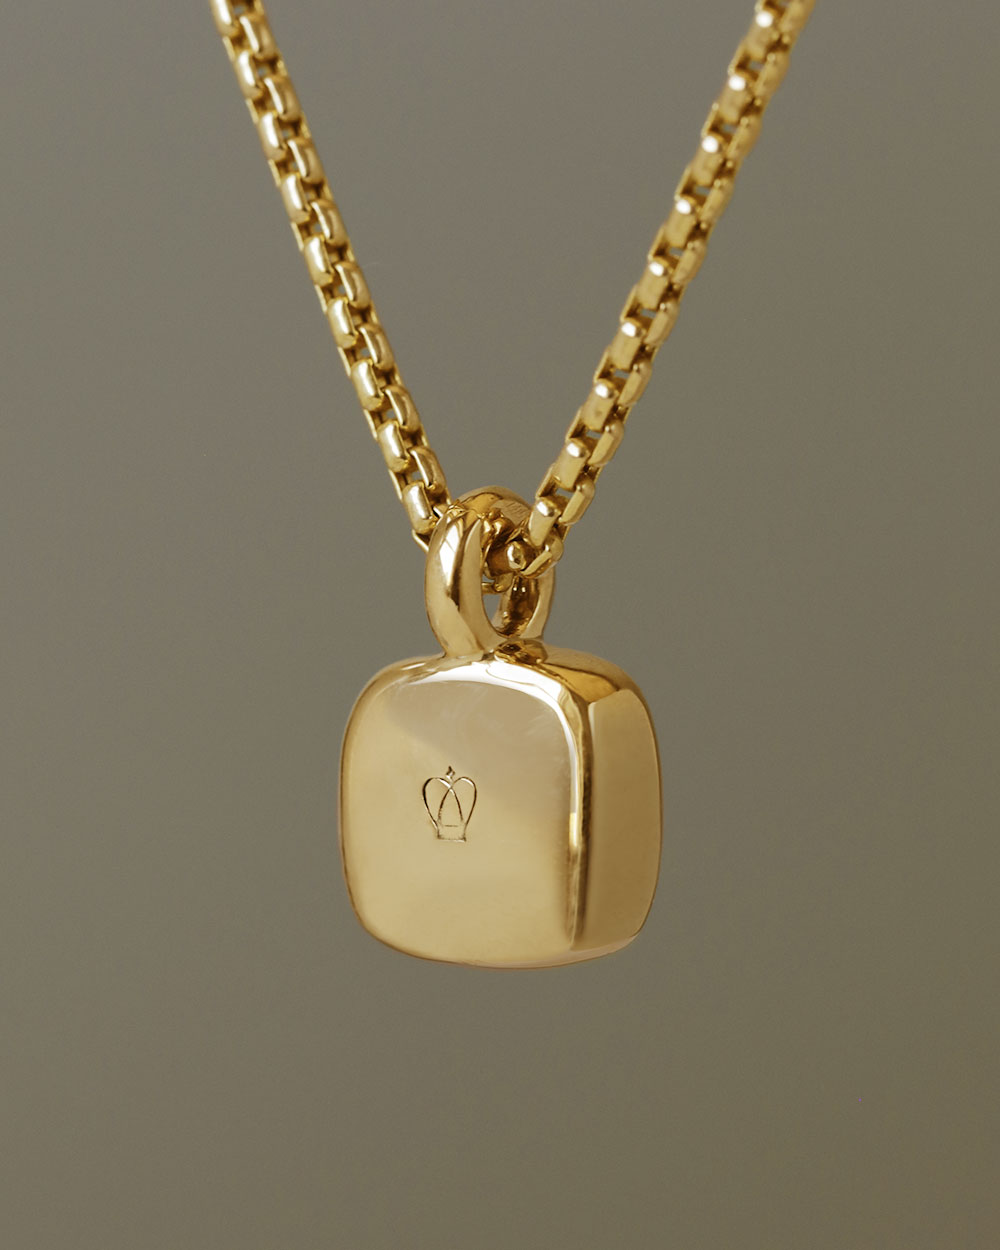 Rounded square gem inside a solid 18k yellow gold bezel, hanging on a solid 14k yellow gold box chain. Sovereign Pendant by George Rings.